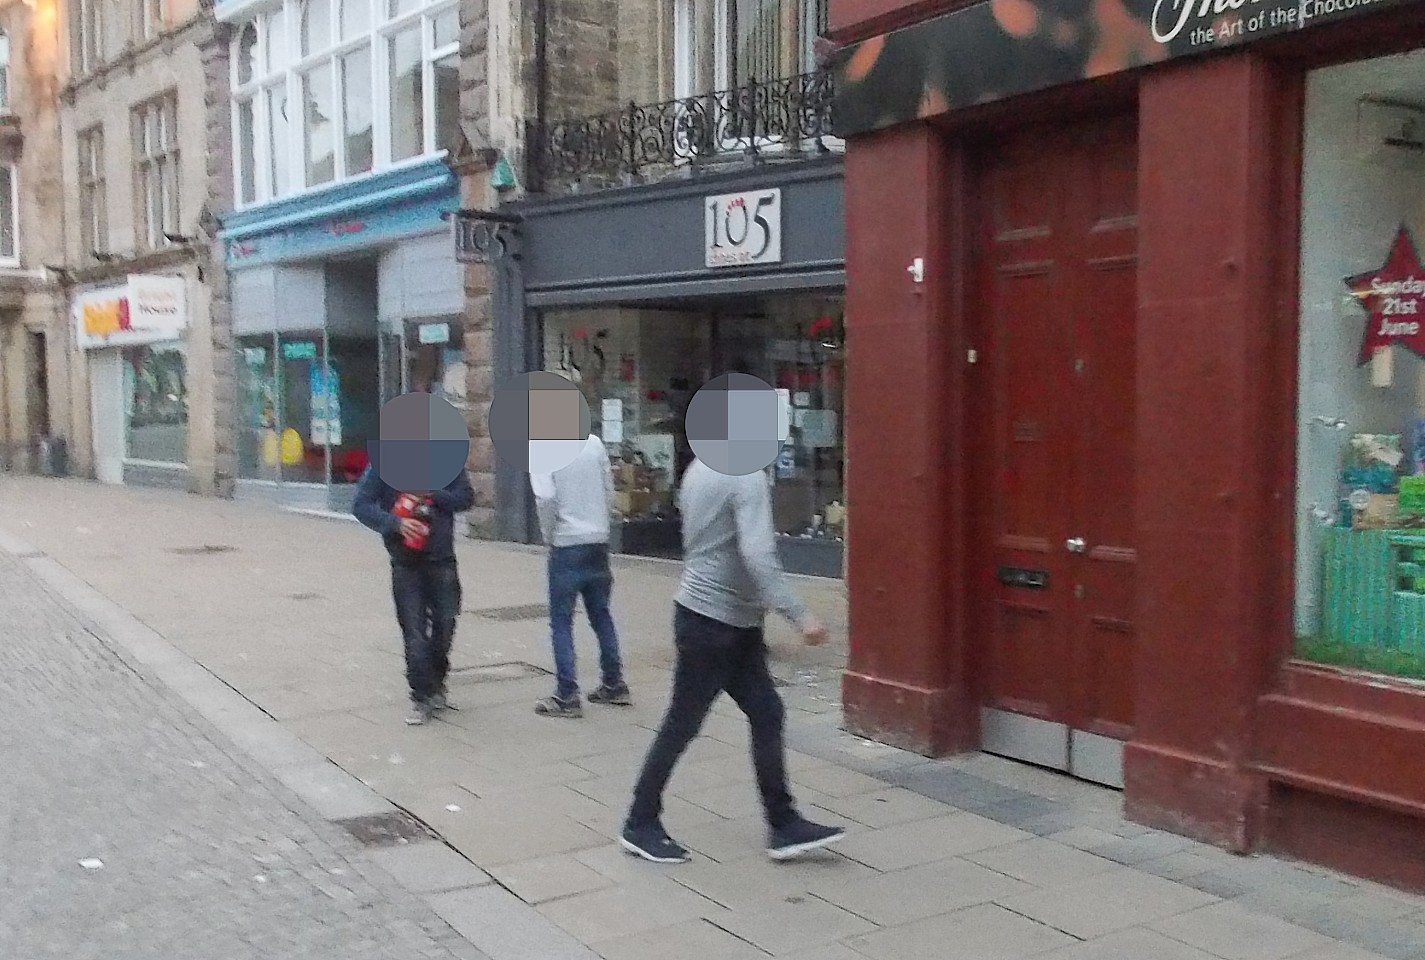 The teenagers that Mr Rigley photographed in Elgin High Street before he was viciously assaulted.